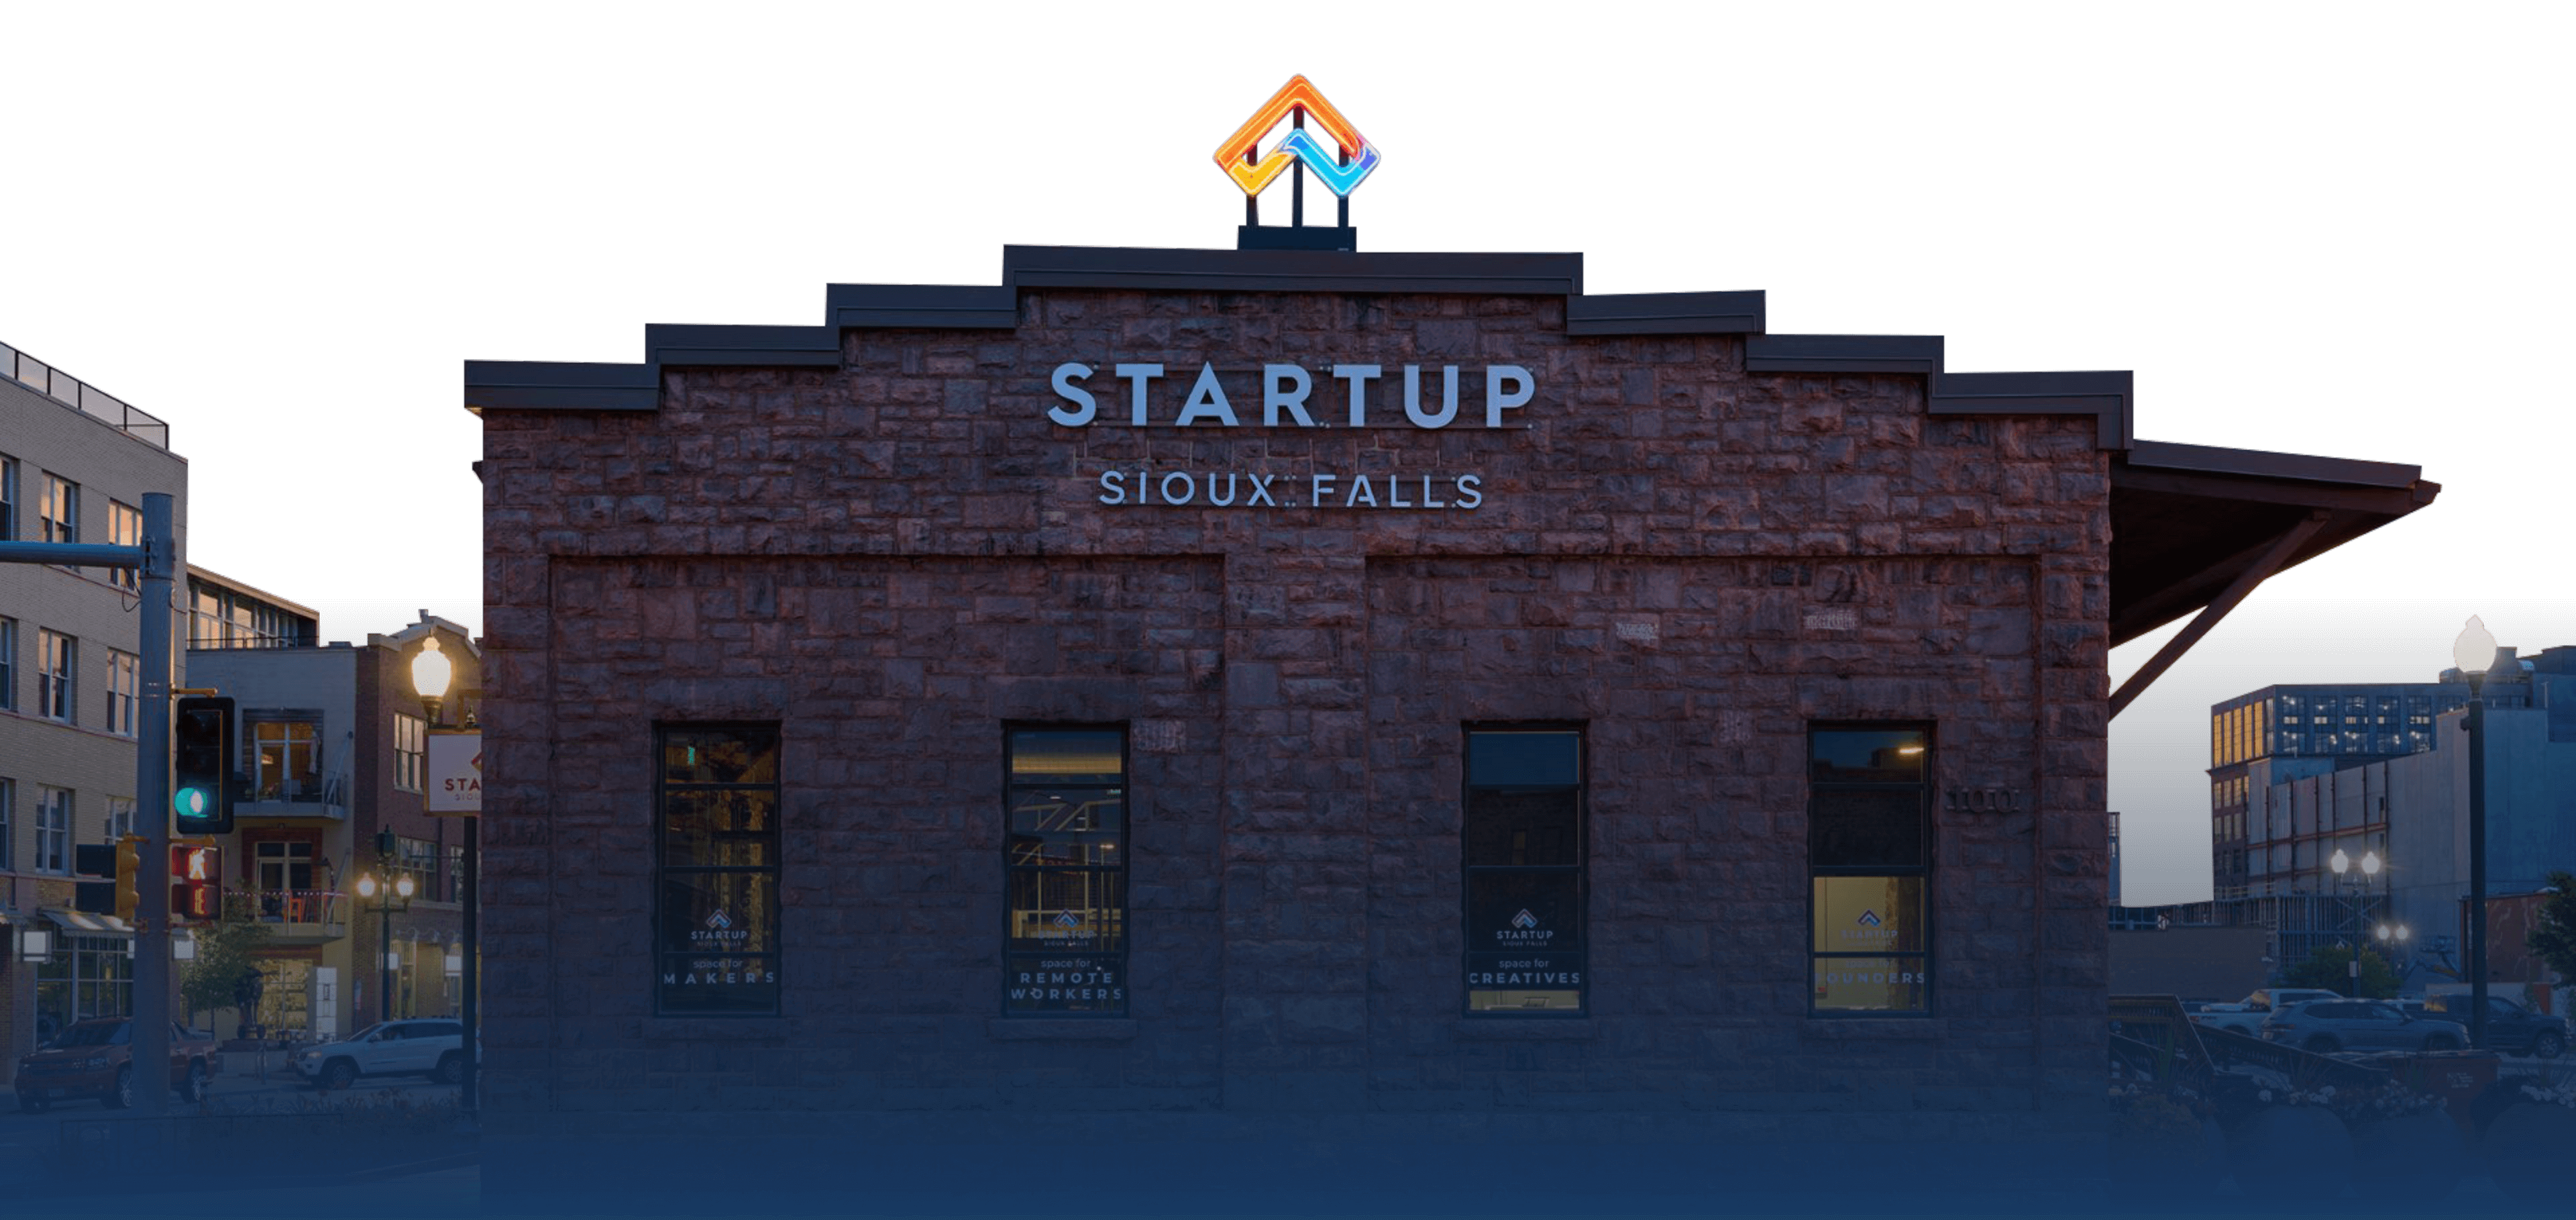 Startup Sioux Falls building exterior